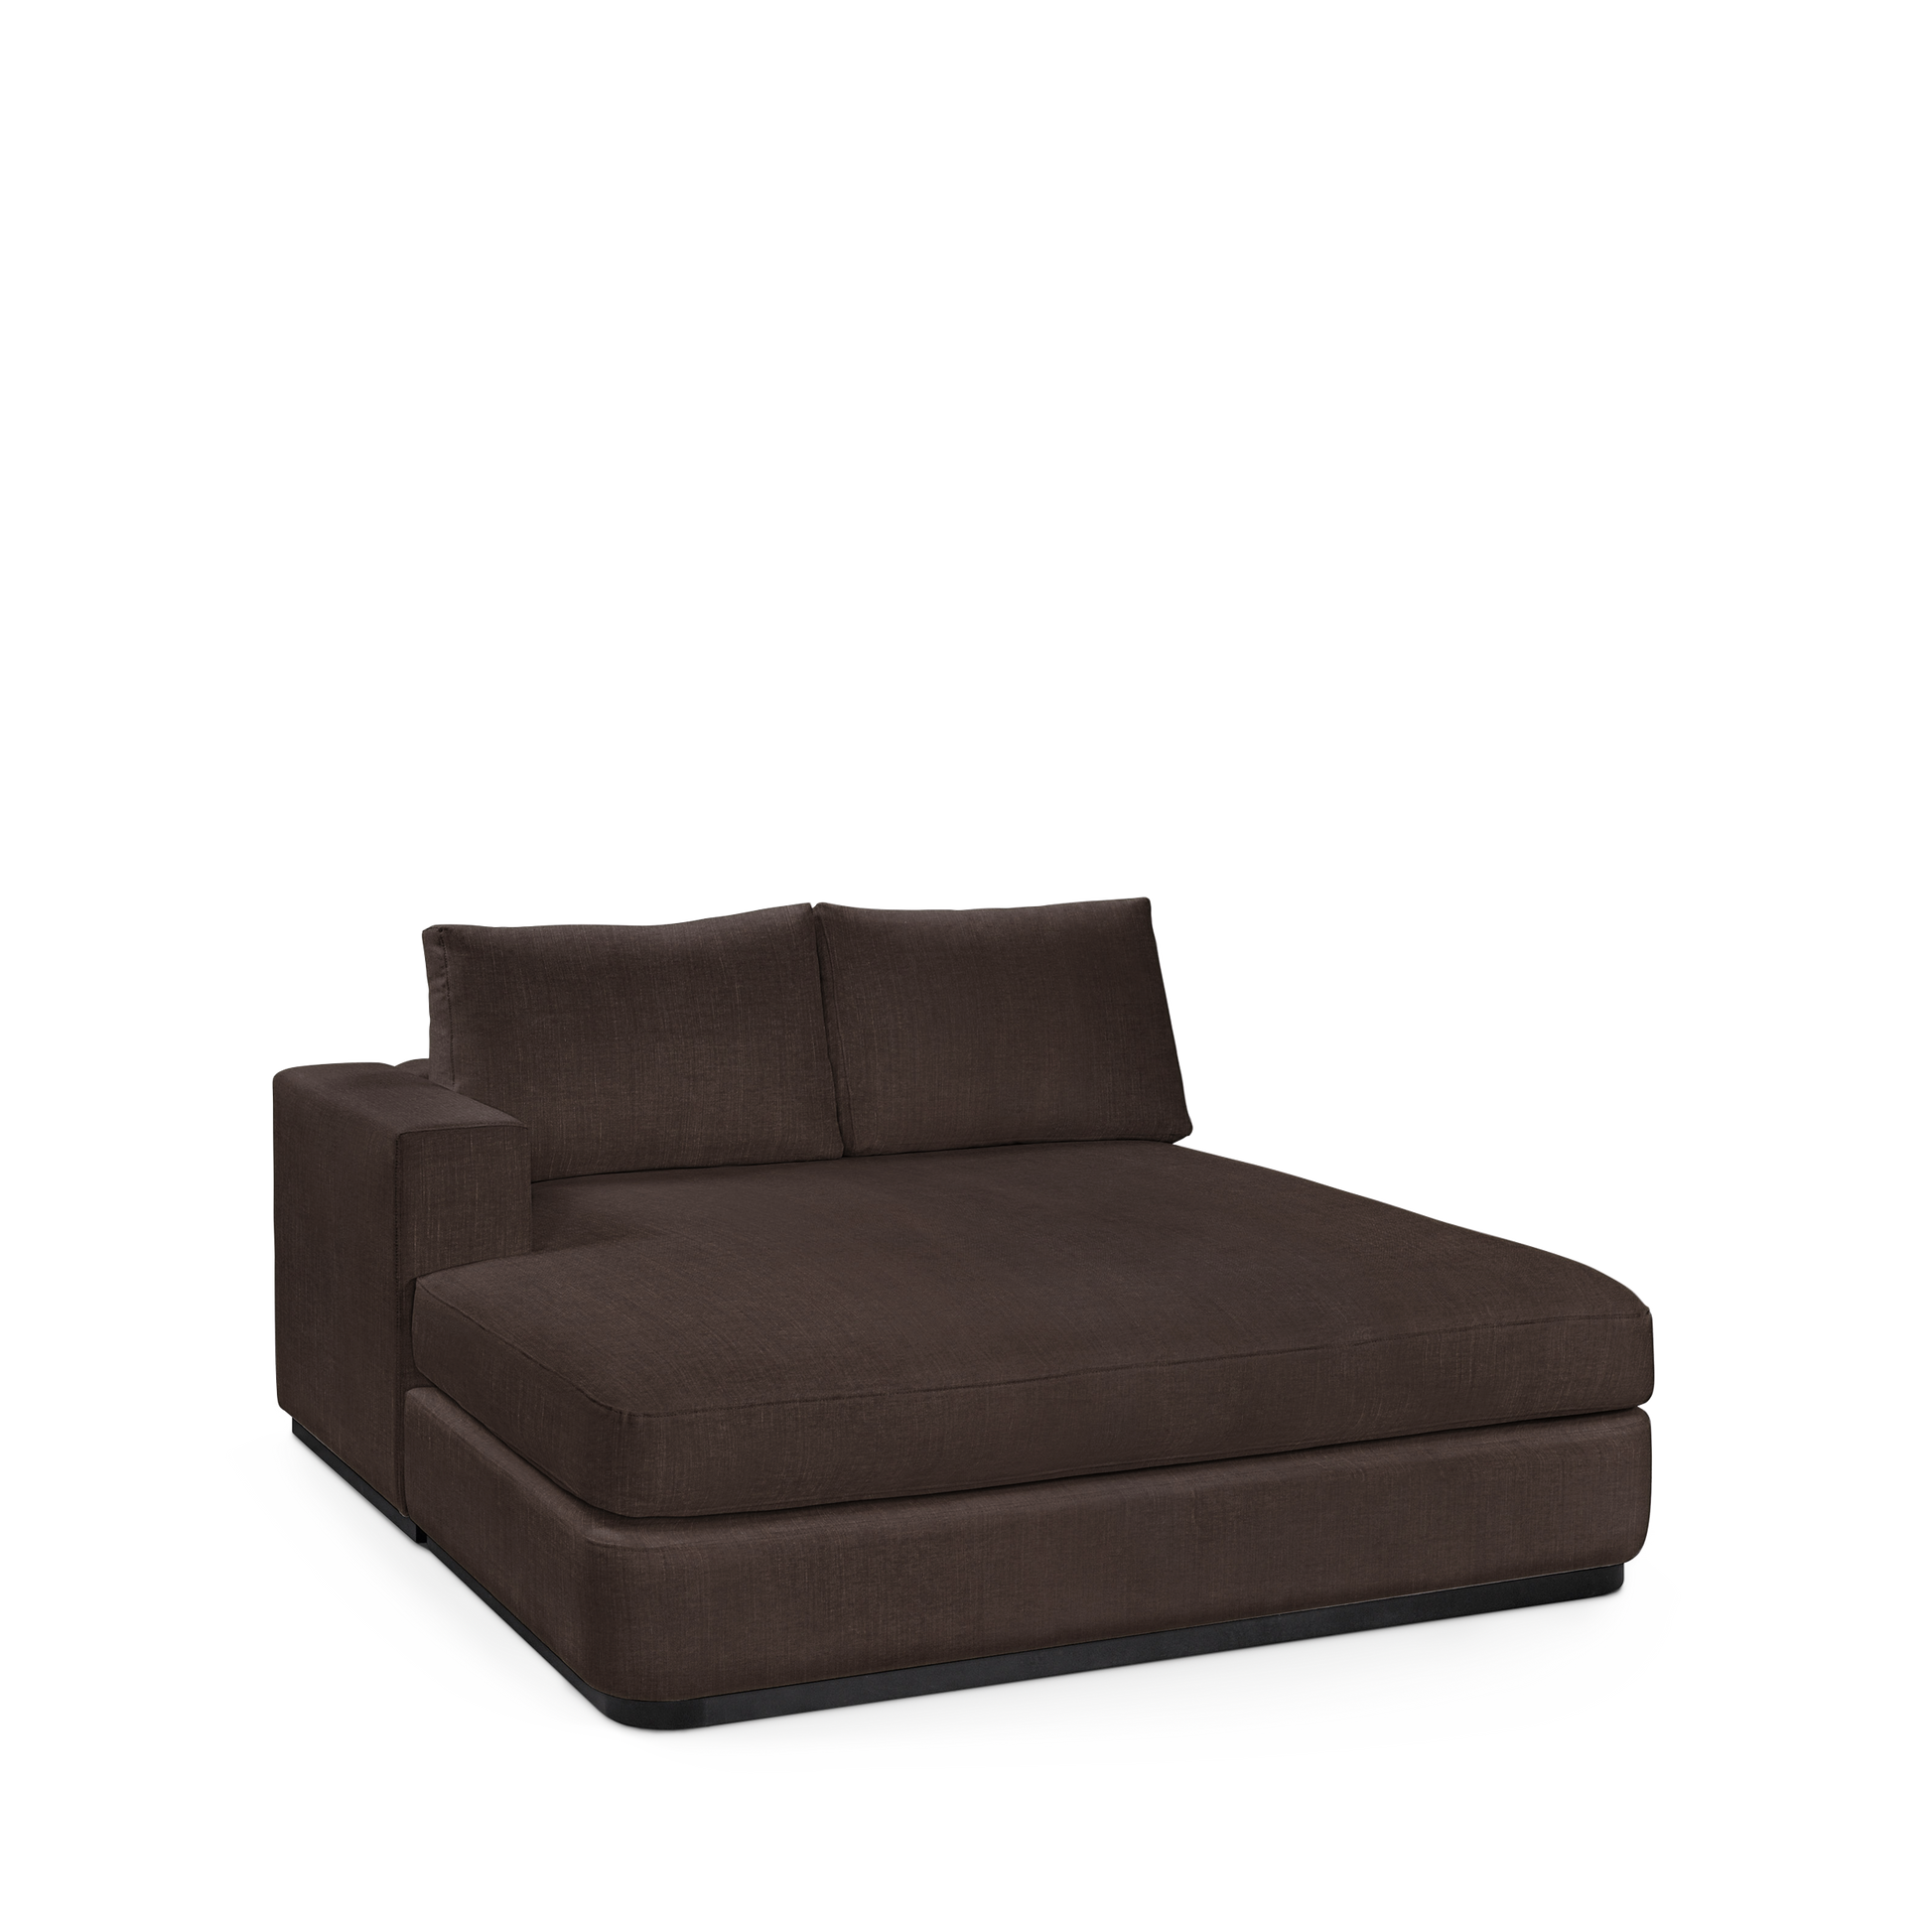 ATLAS 160 Lounge Bed arm rest left with linara brown textile